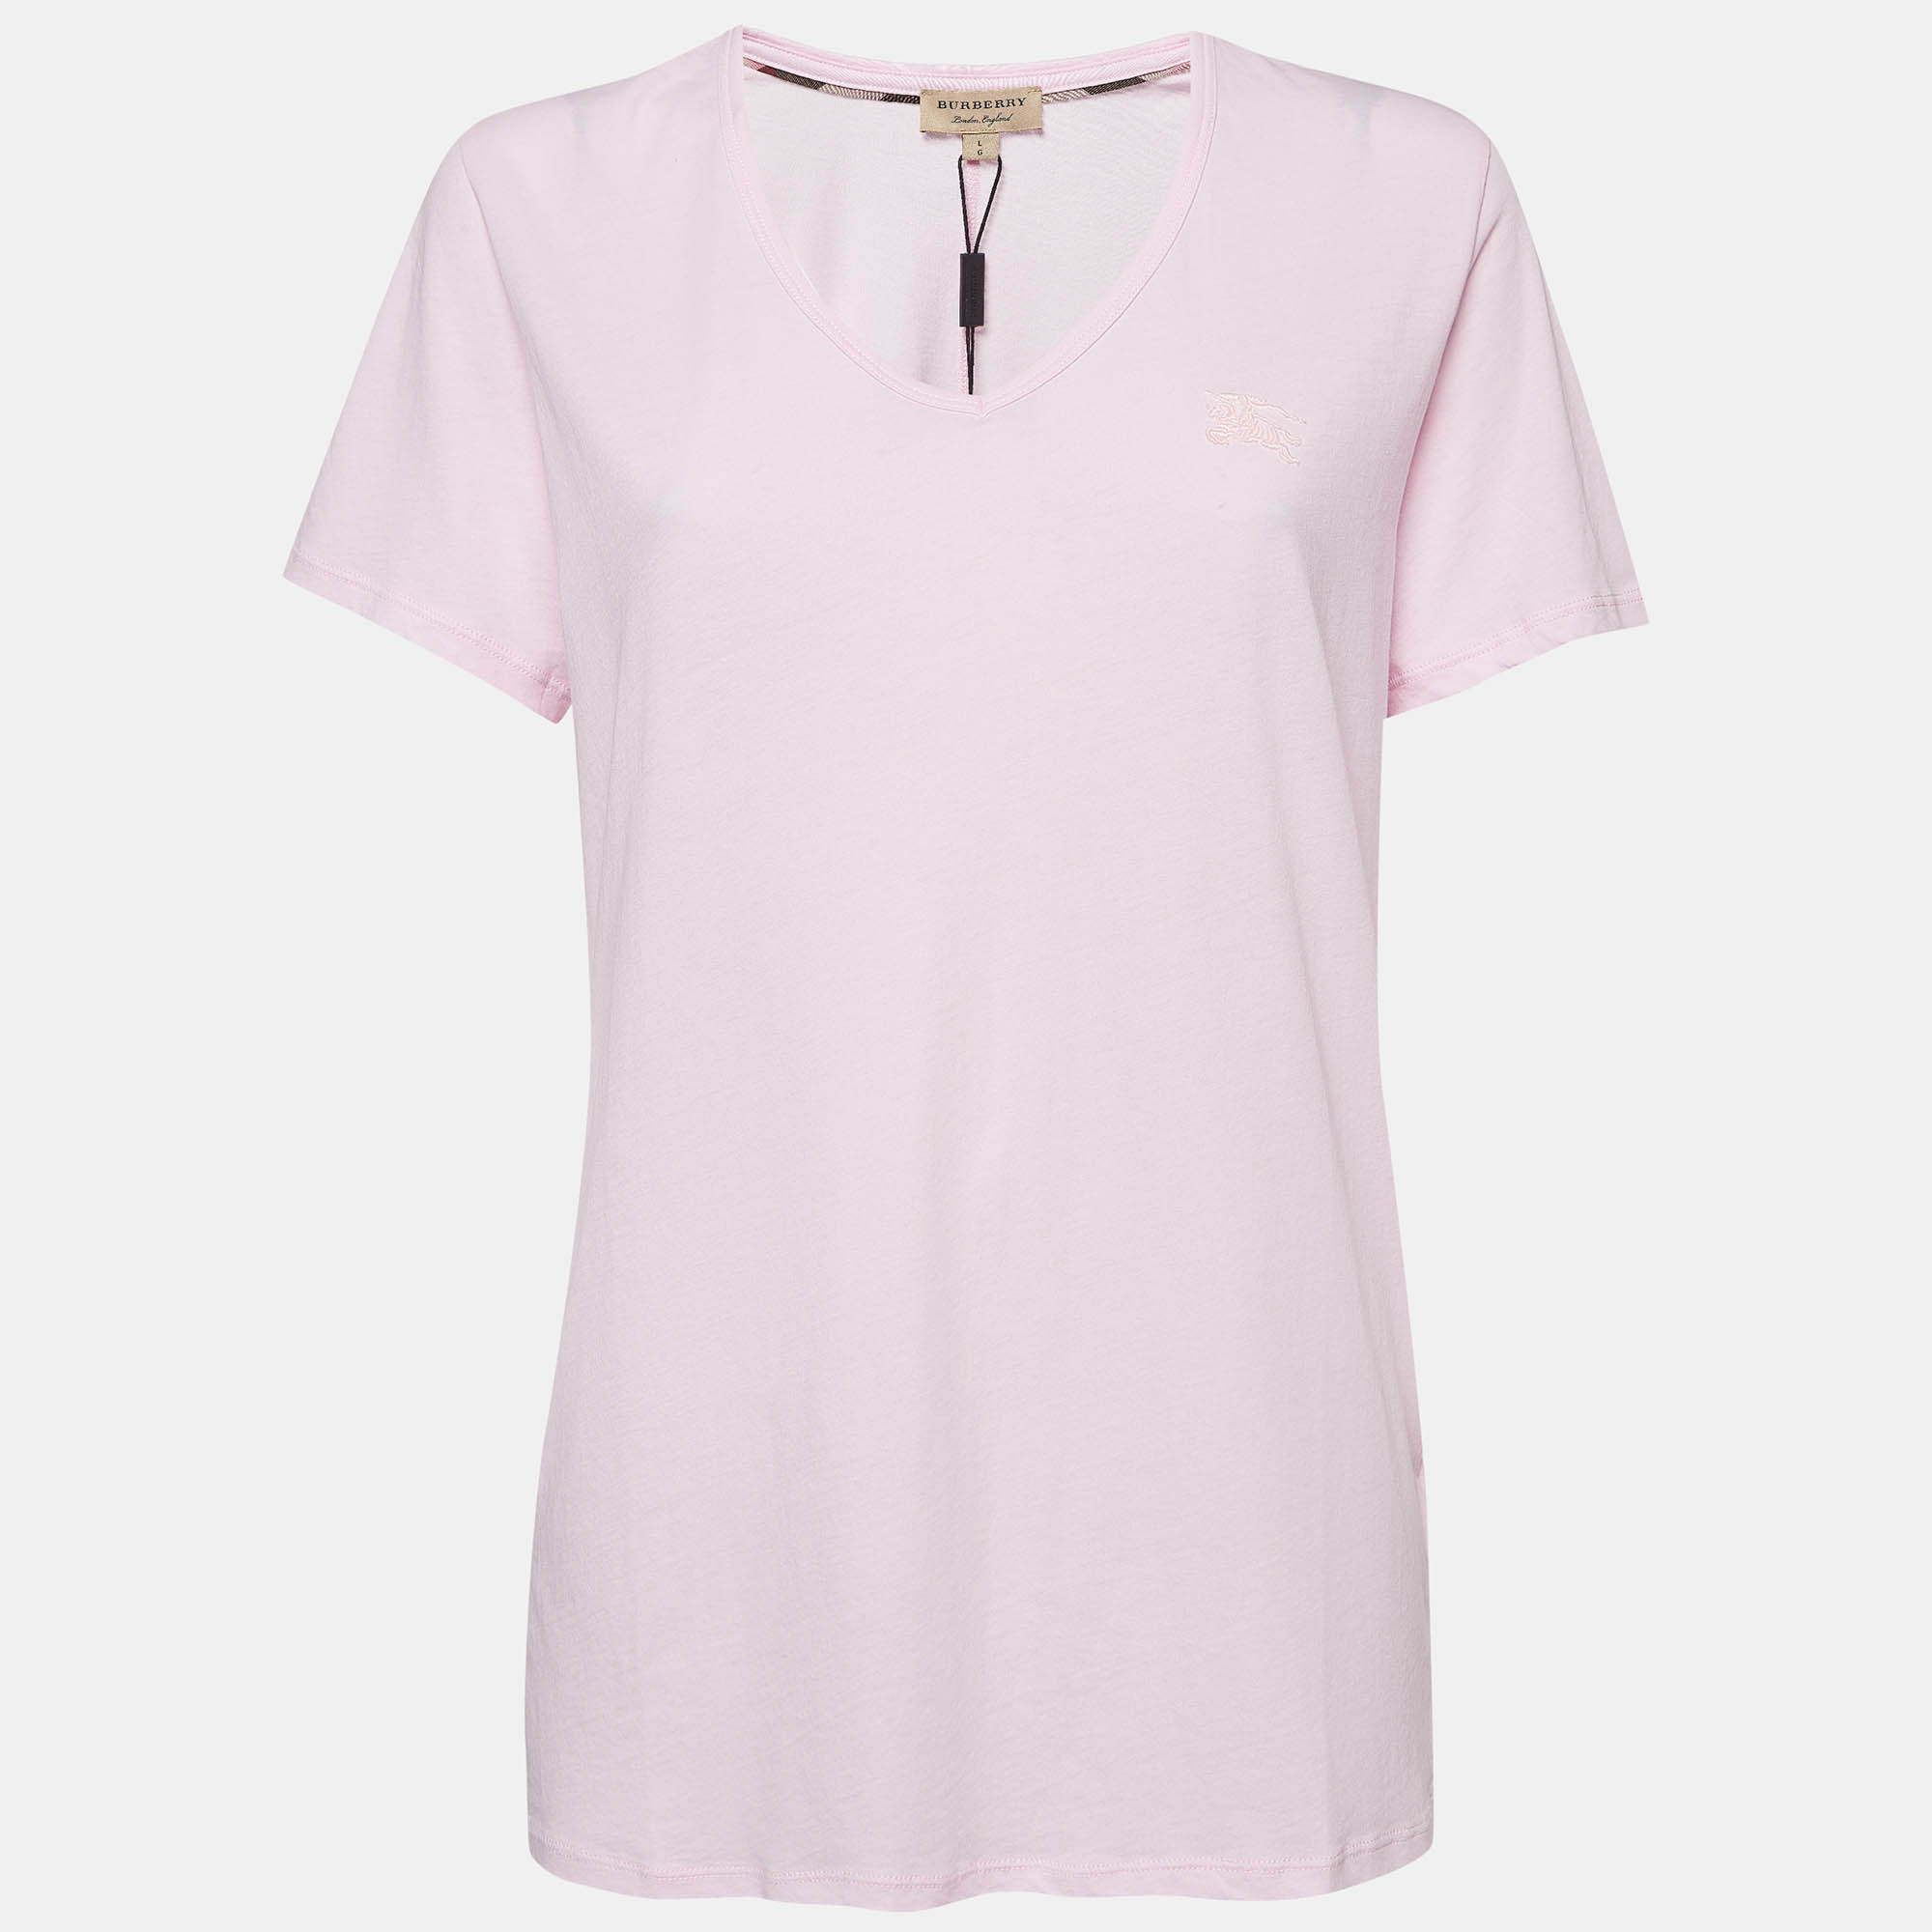 

Burberry Pink Embroidered Cotton V-Neck T-Shirt